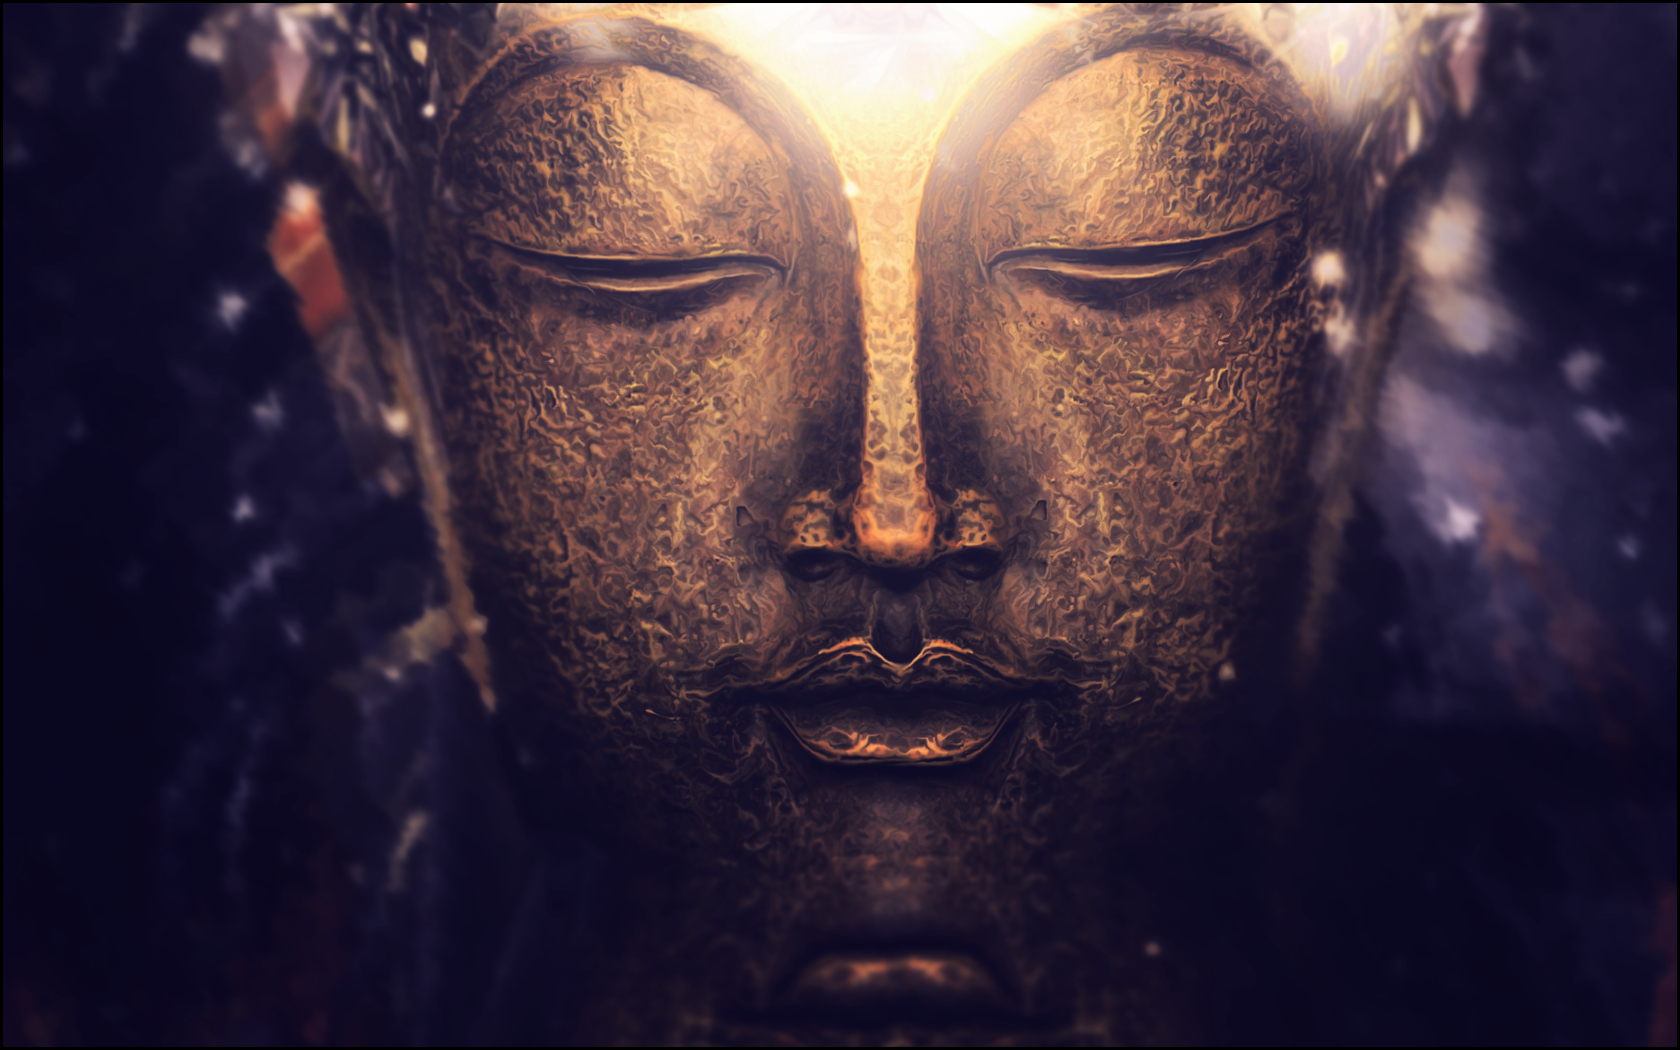 Free download Peace Buddha Wallpaper 1680x1050 Peace Buddha Buddhism [1680x1050] for your Desktop, Mobile & Tablet. Explore Buddha Wallpaper. Buddhist Image Wallpaper, Buddha Wallpaper for Desktop, Free Buddhist Wallpaper